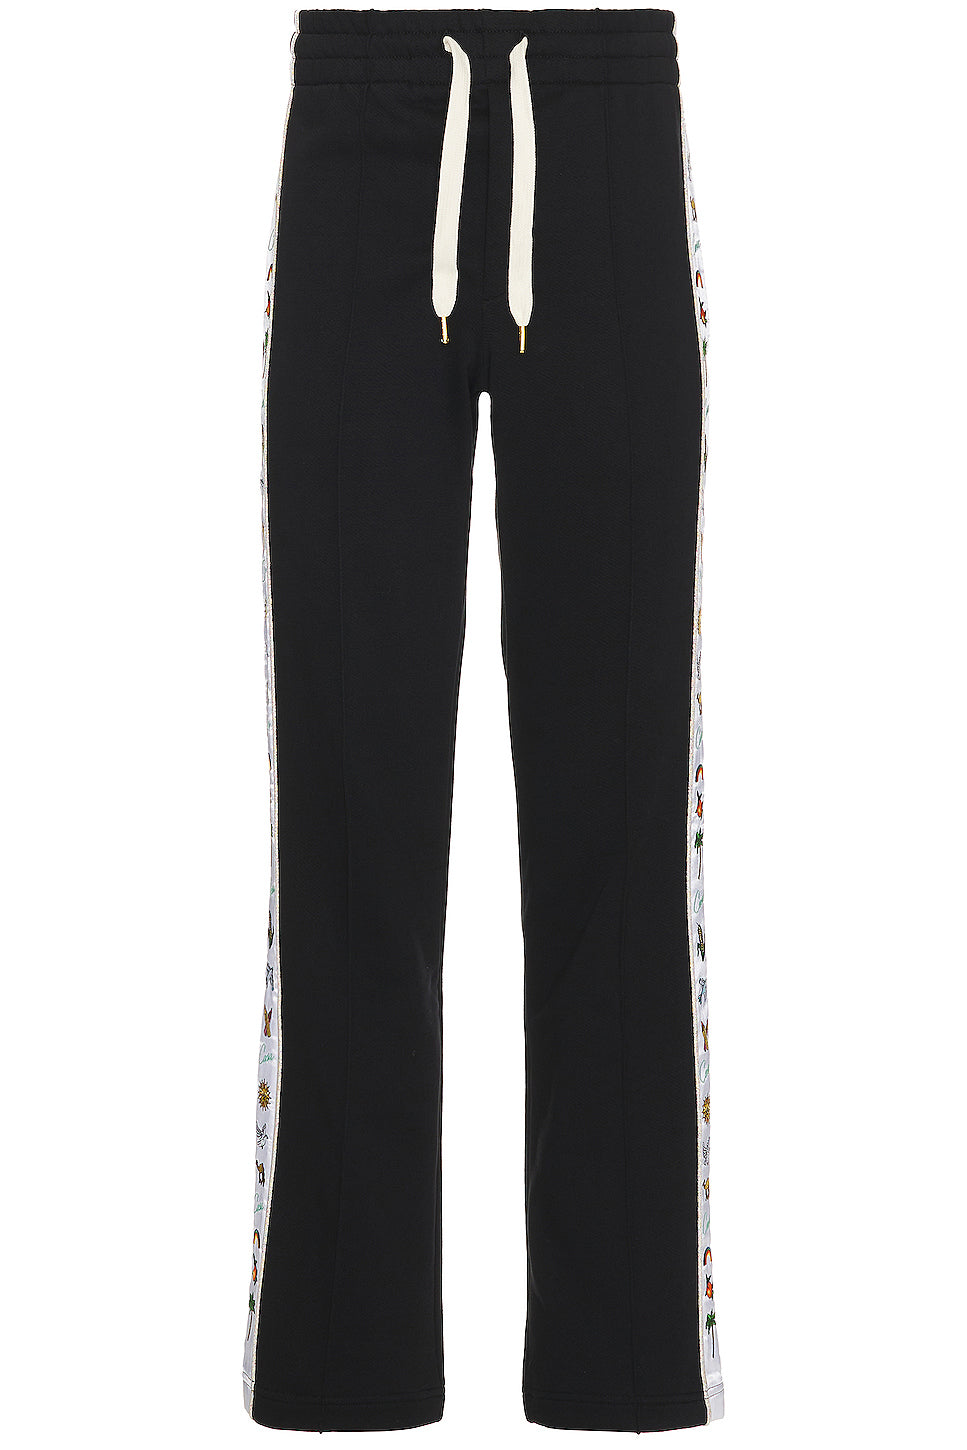 Embroidered Satin Tape Sweatpant